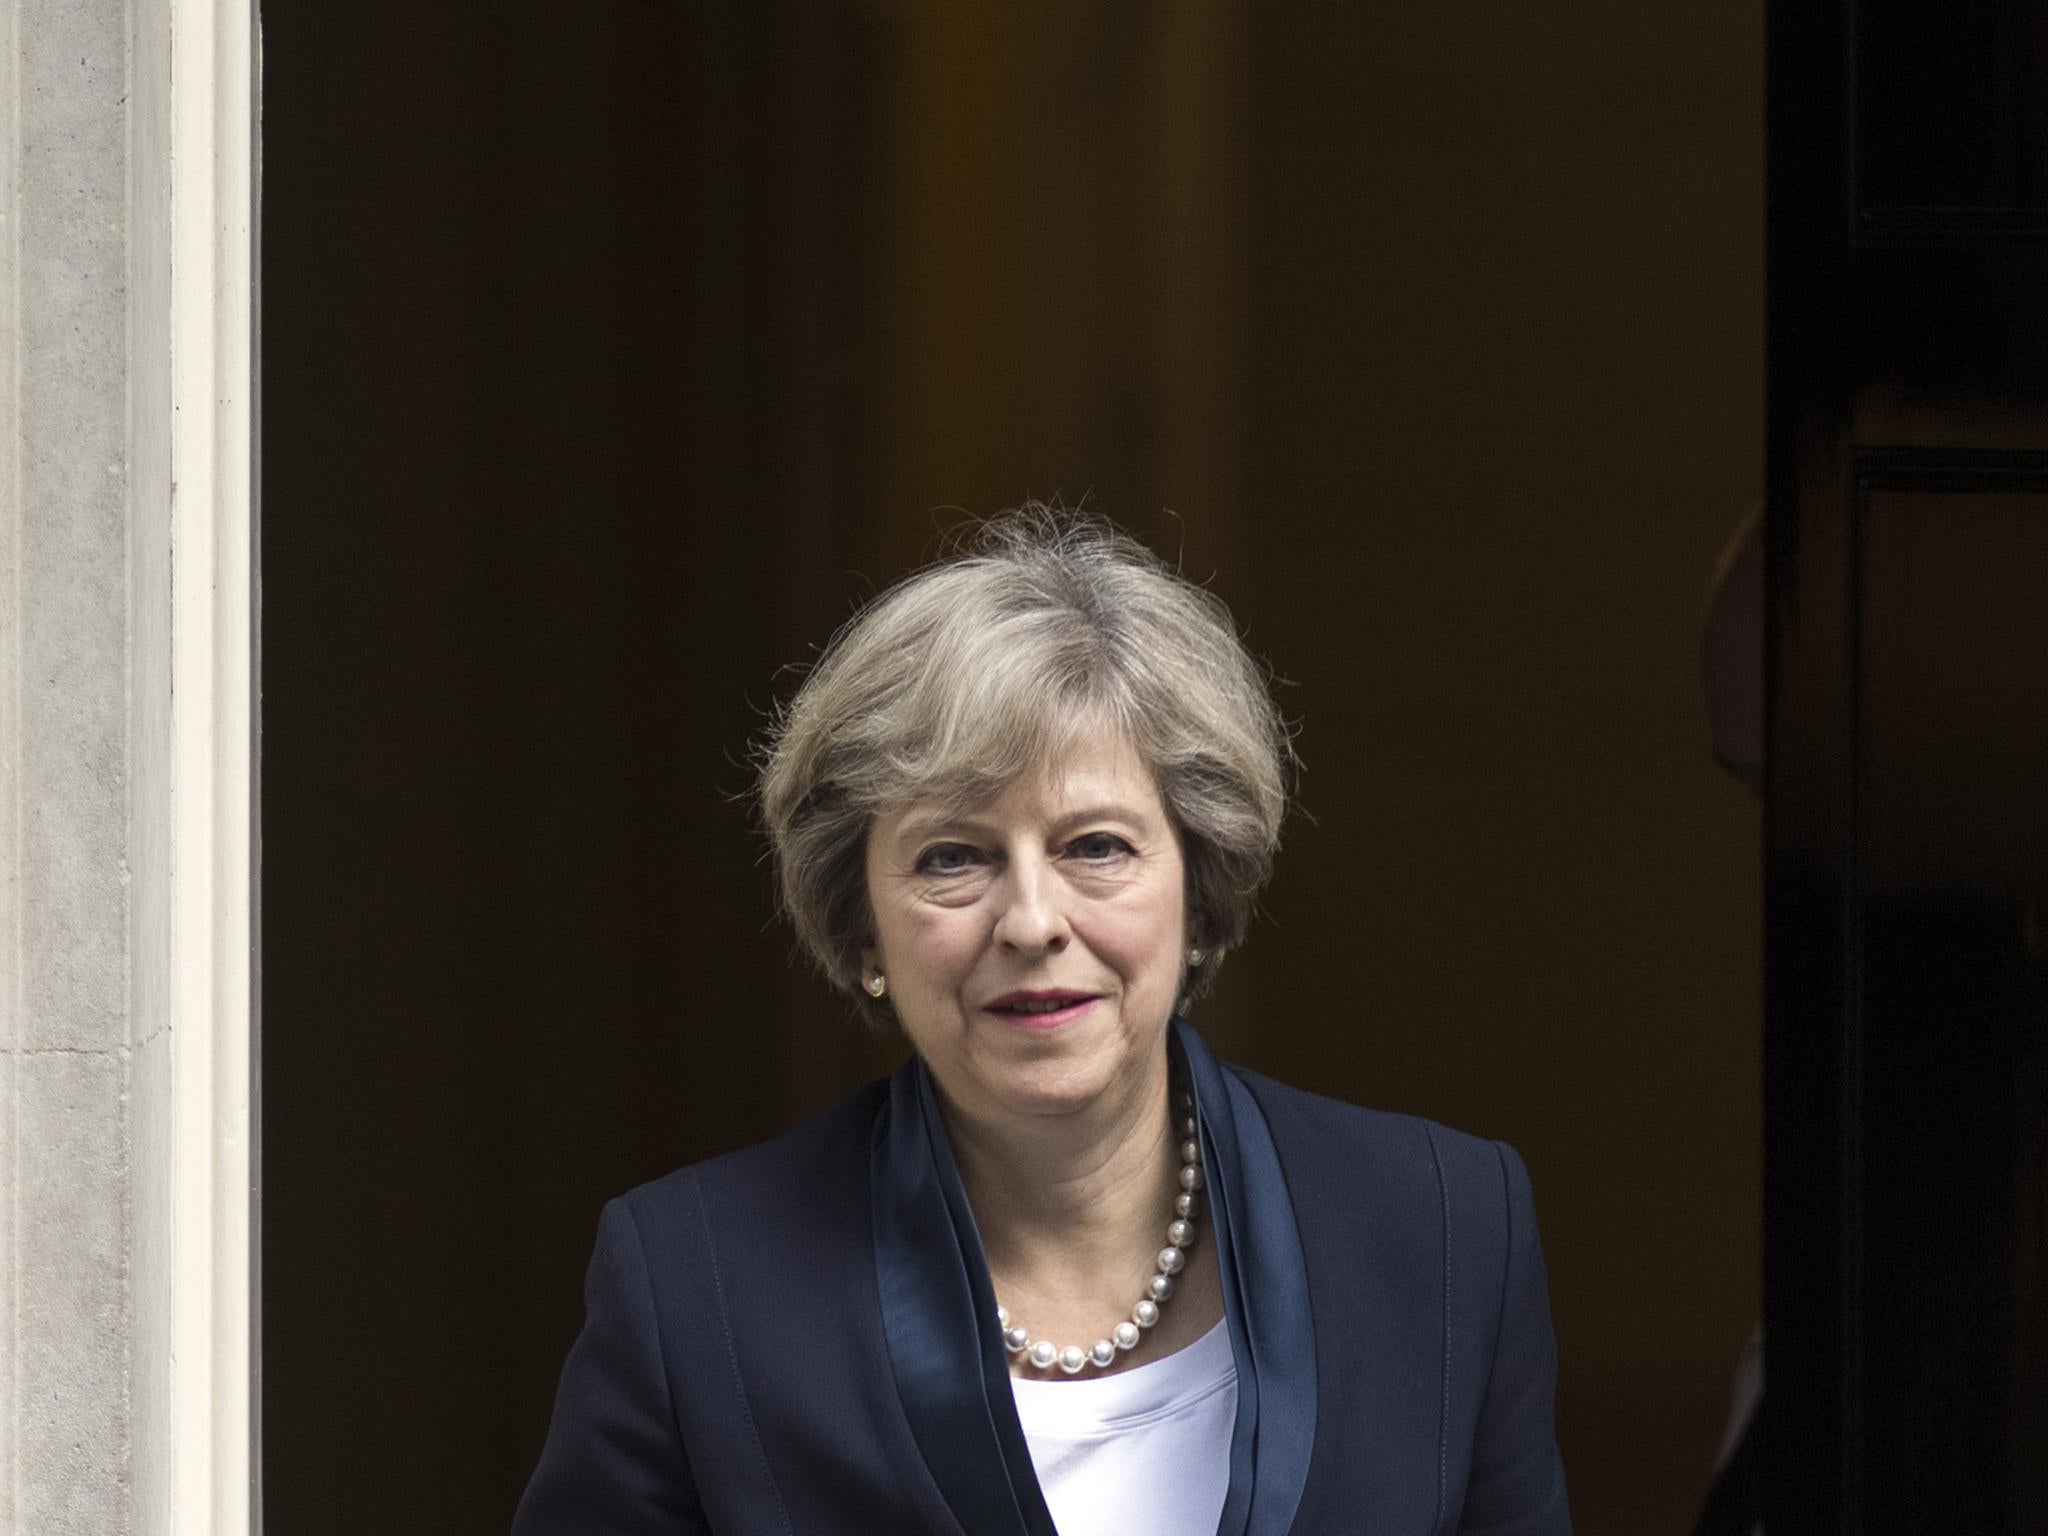 A Downing Street source said Mrs May rejects Mr Tusk's claims that she said she would trigger Article 50 in February